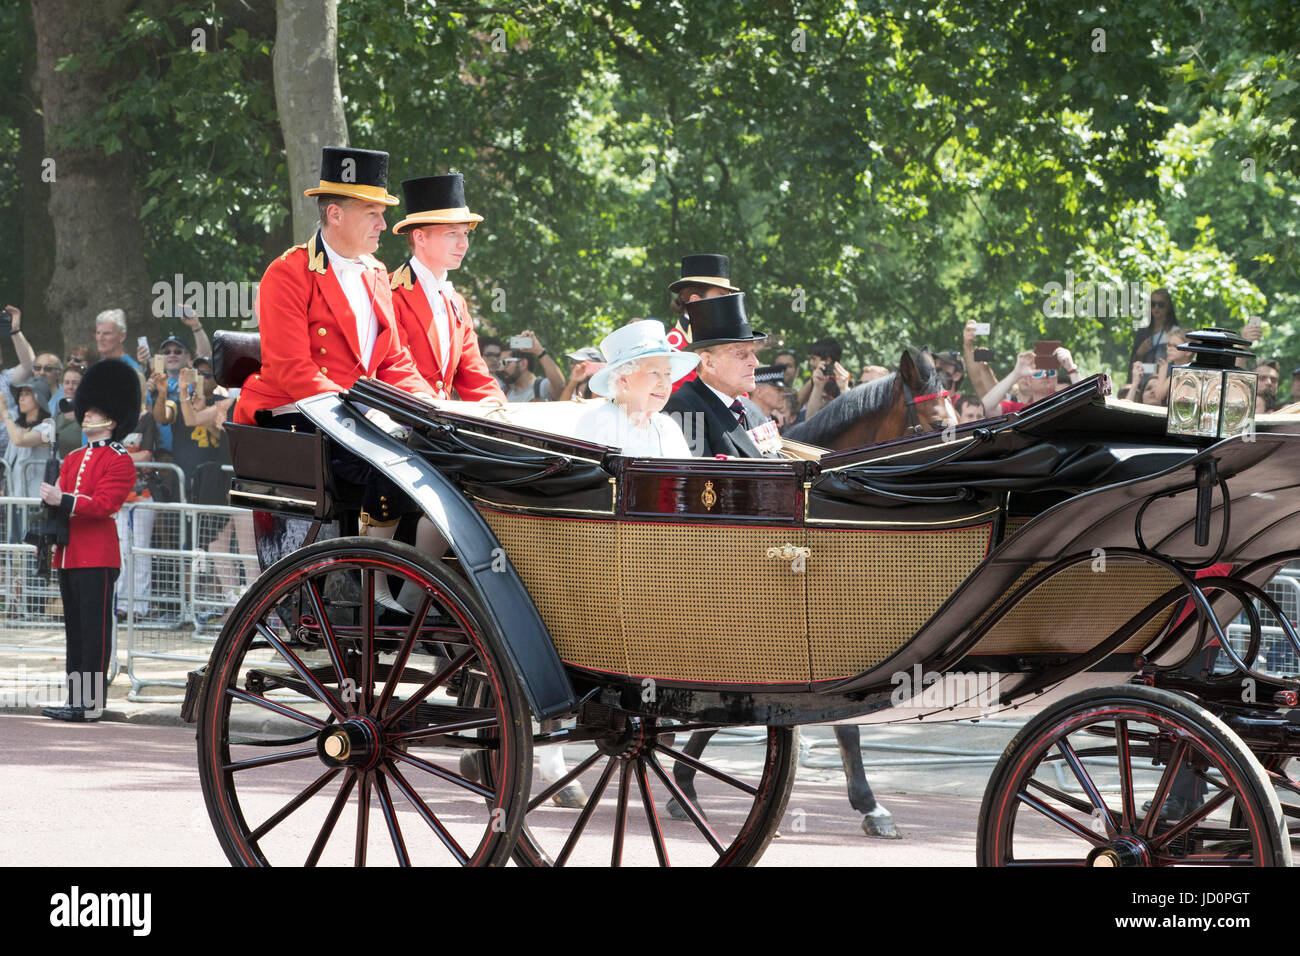 HRH AND PRINCE PHILLIP RETUNING FROM TROOPING THE COLOUR. Stock Photo